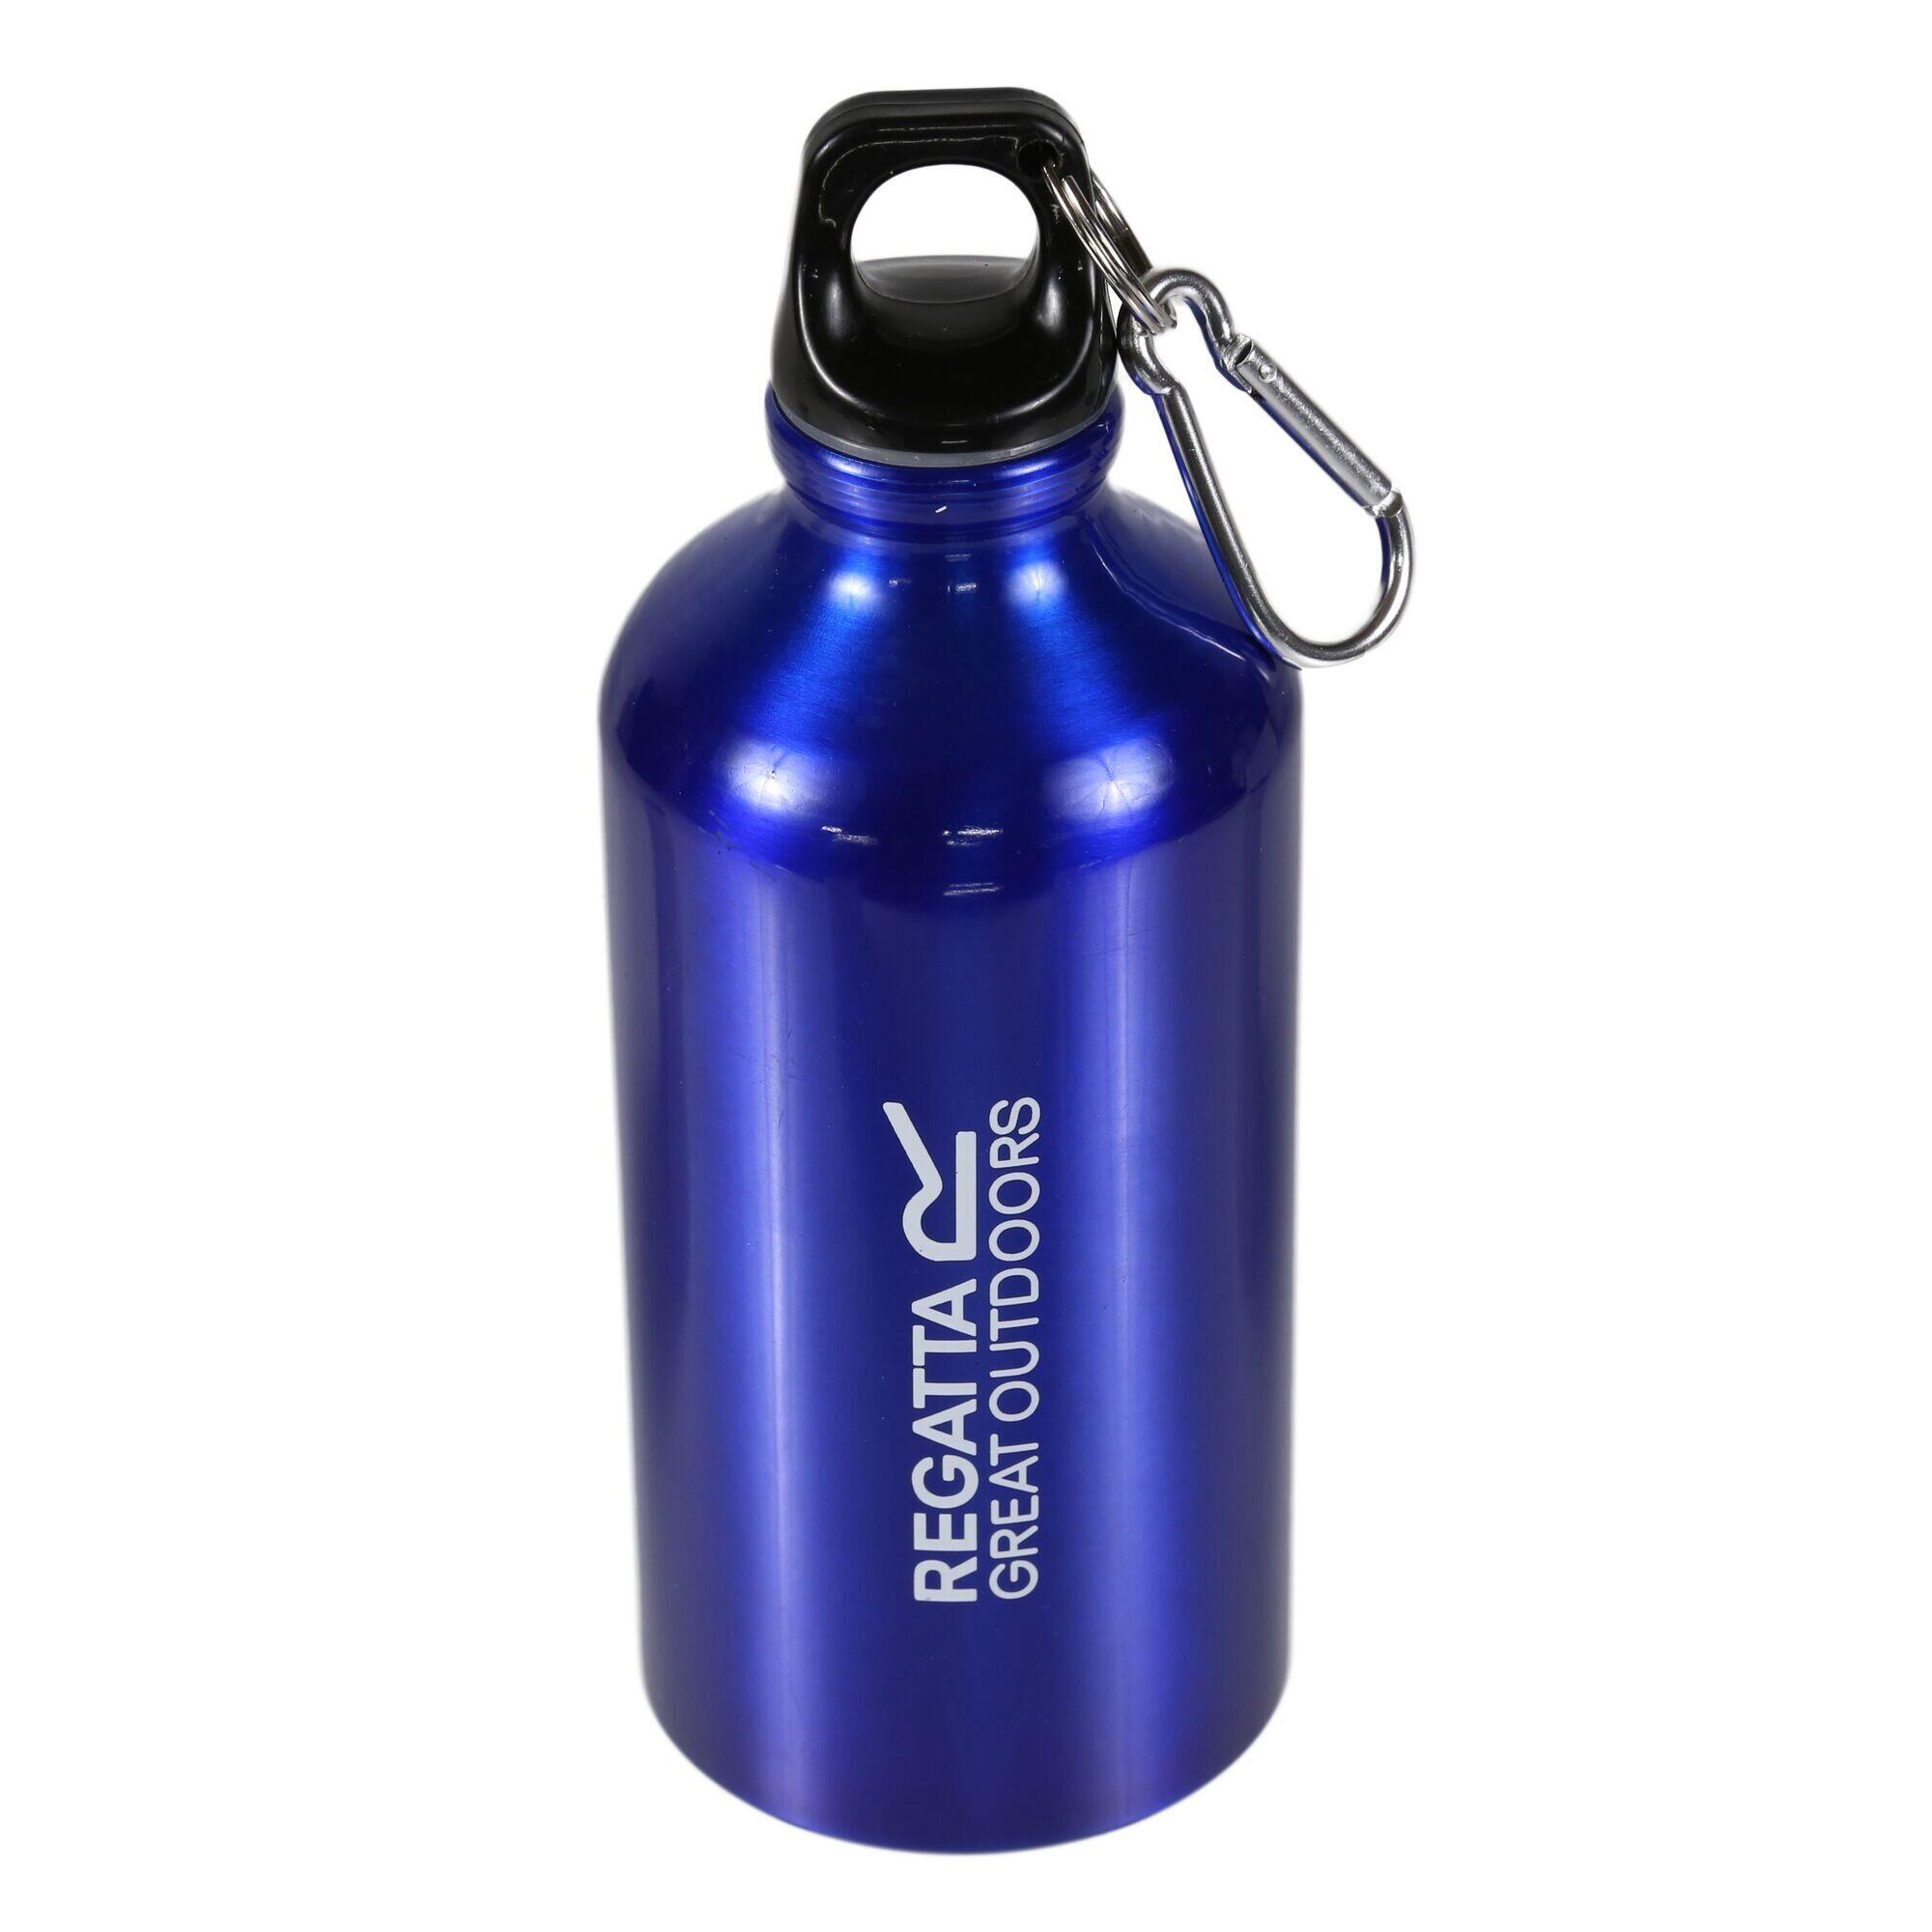 0.5L Adults' Camping Drinking Bottle - Oxford Blue 1/1